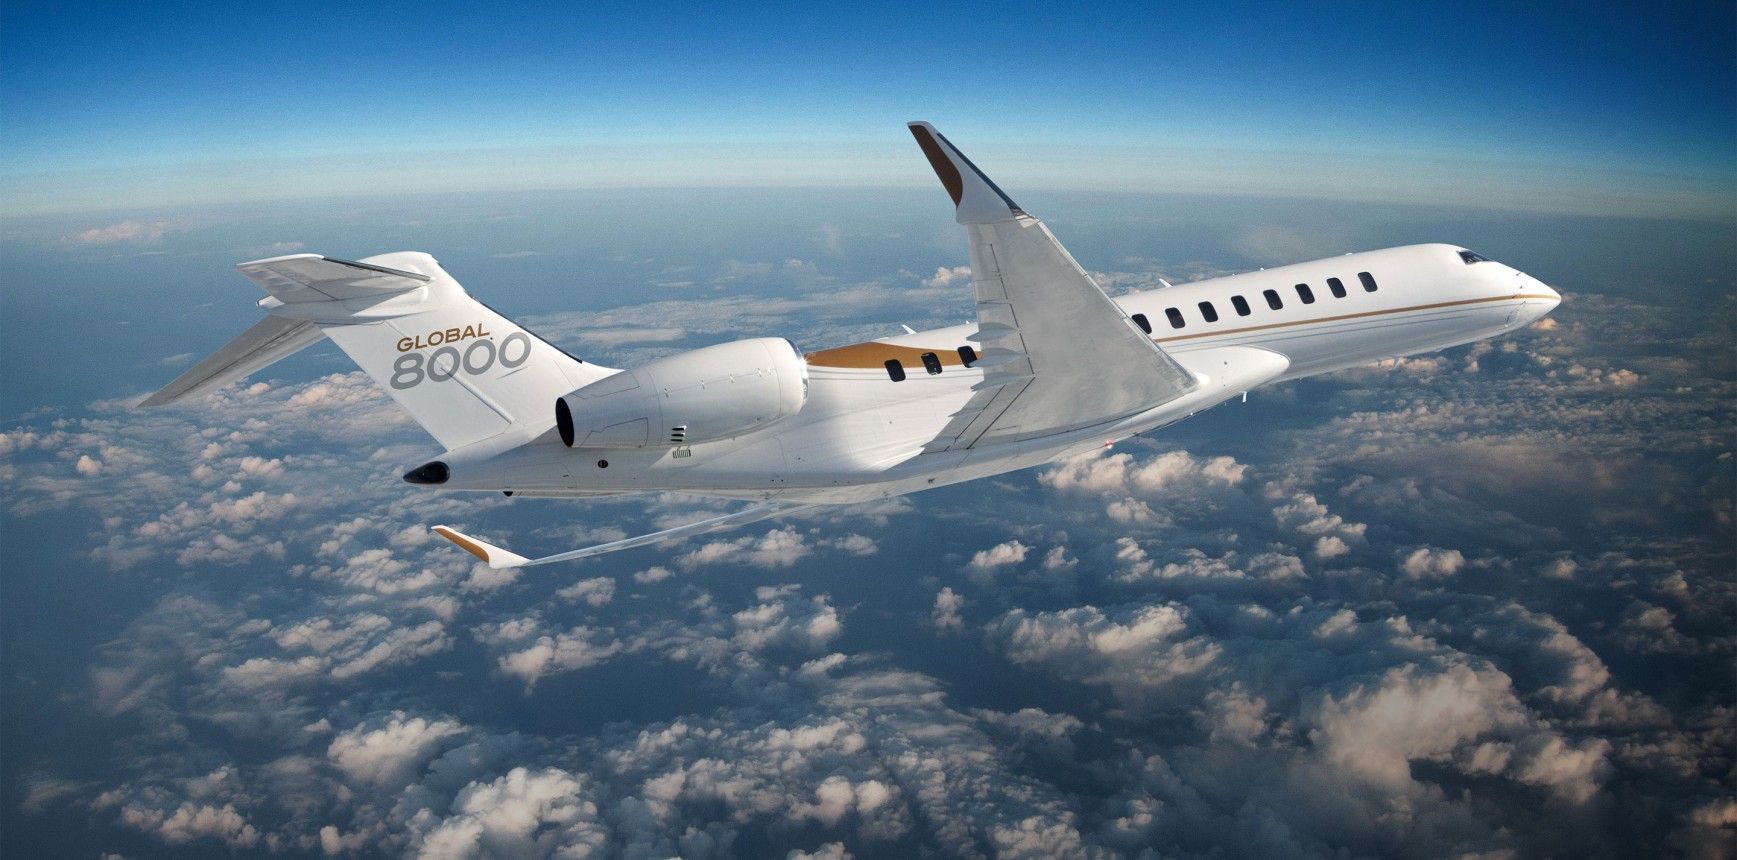 A Bombardier Global 8000 Turning Above The Clouds.